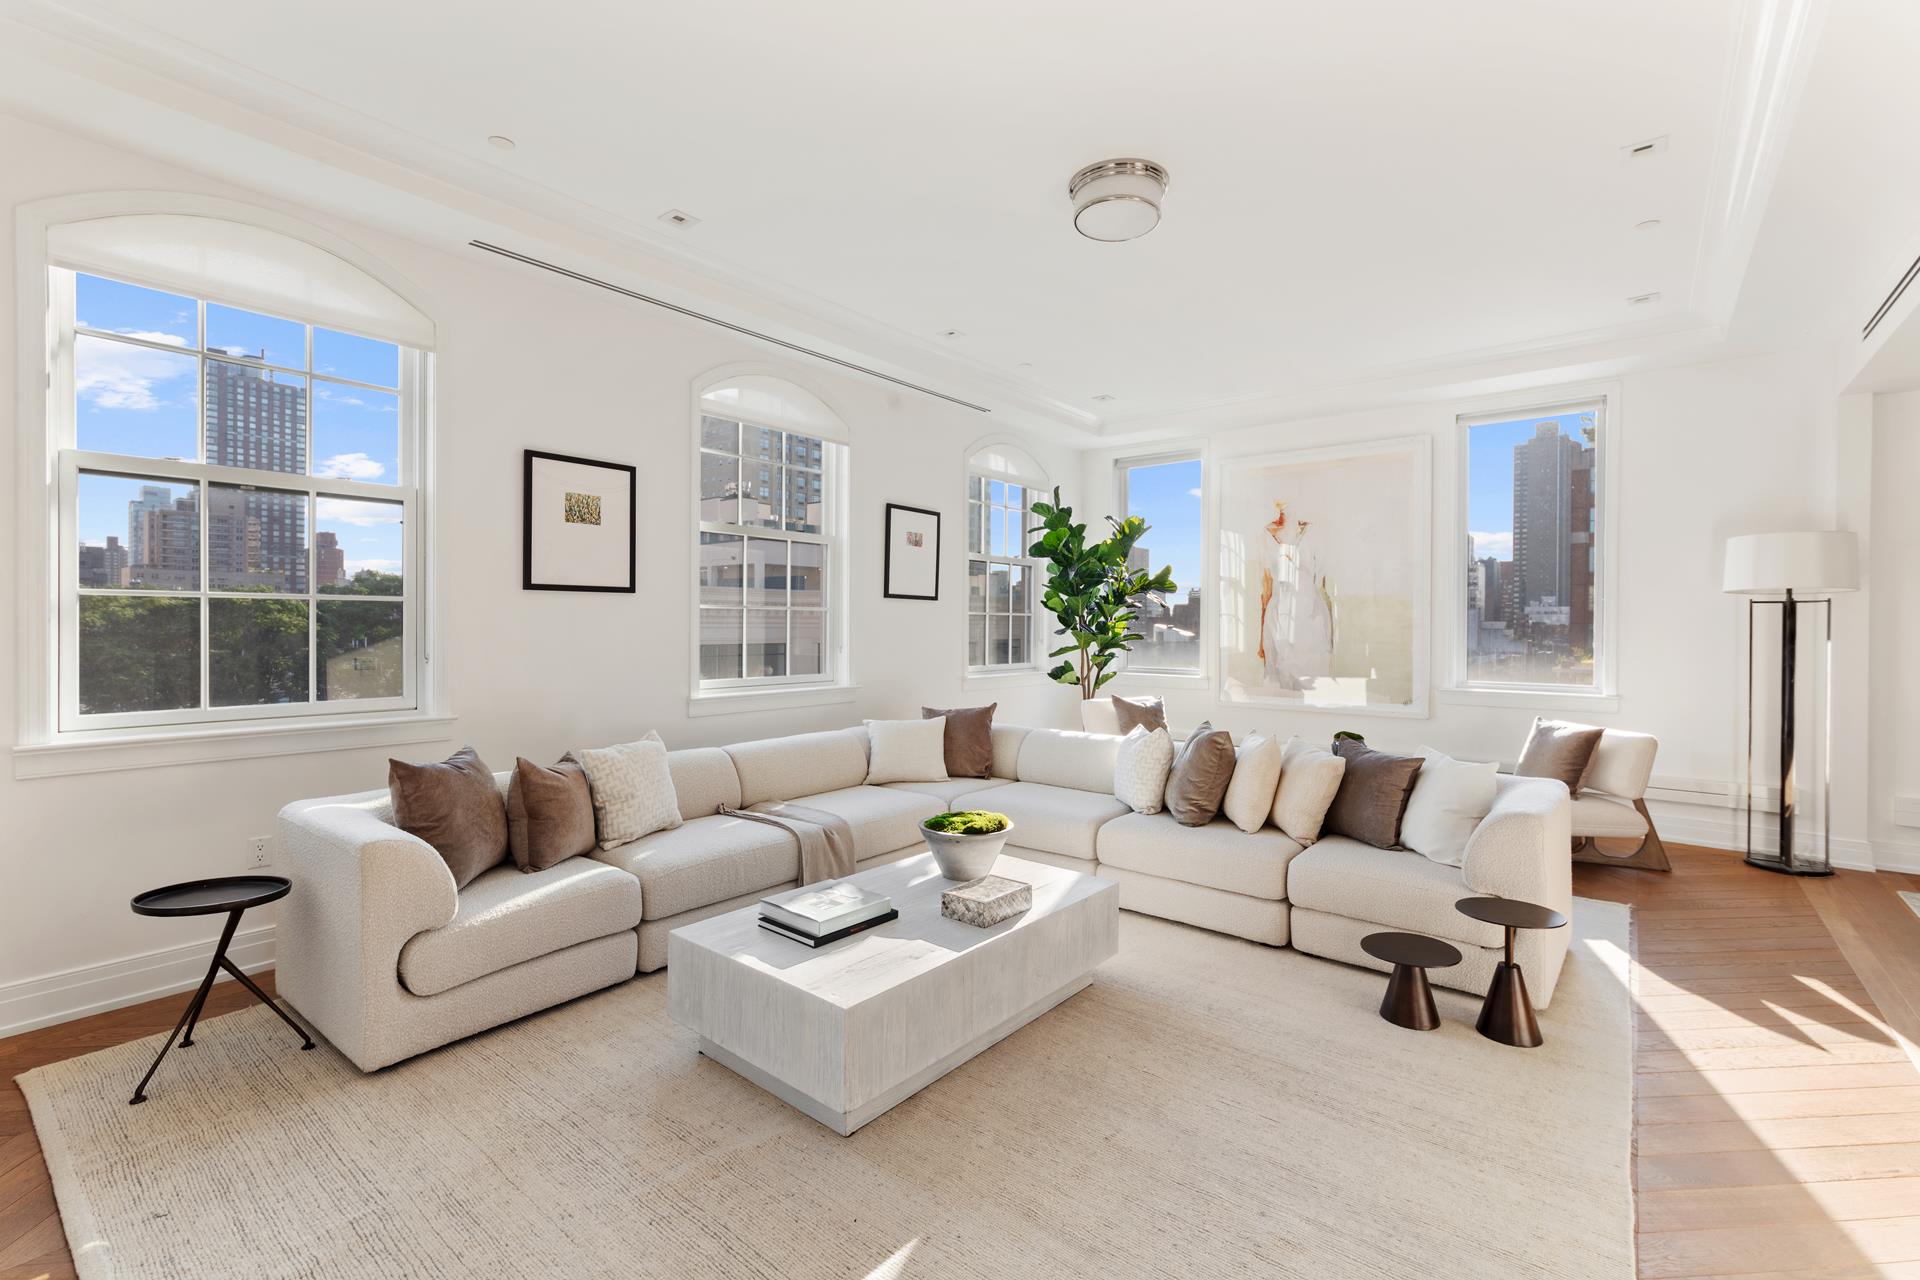 320 East 82nd Street Th, Yorkville, Upper East Side, NYC - 4 Bedrooms  
5.5 Bathrooms  
10 Rooms - 